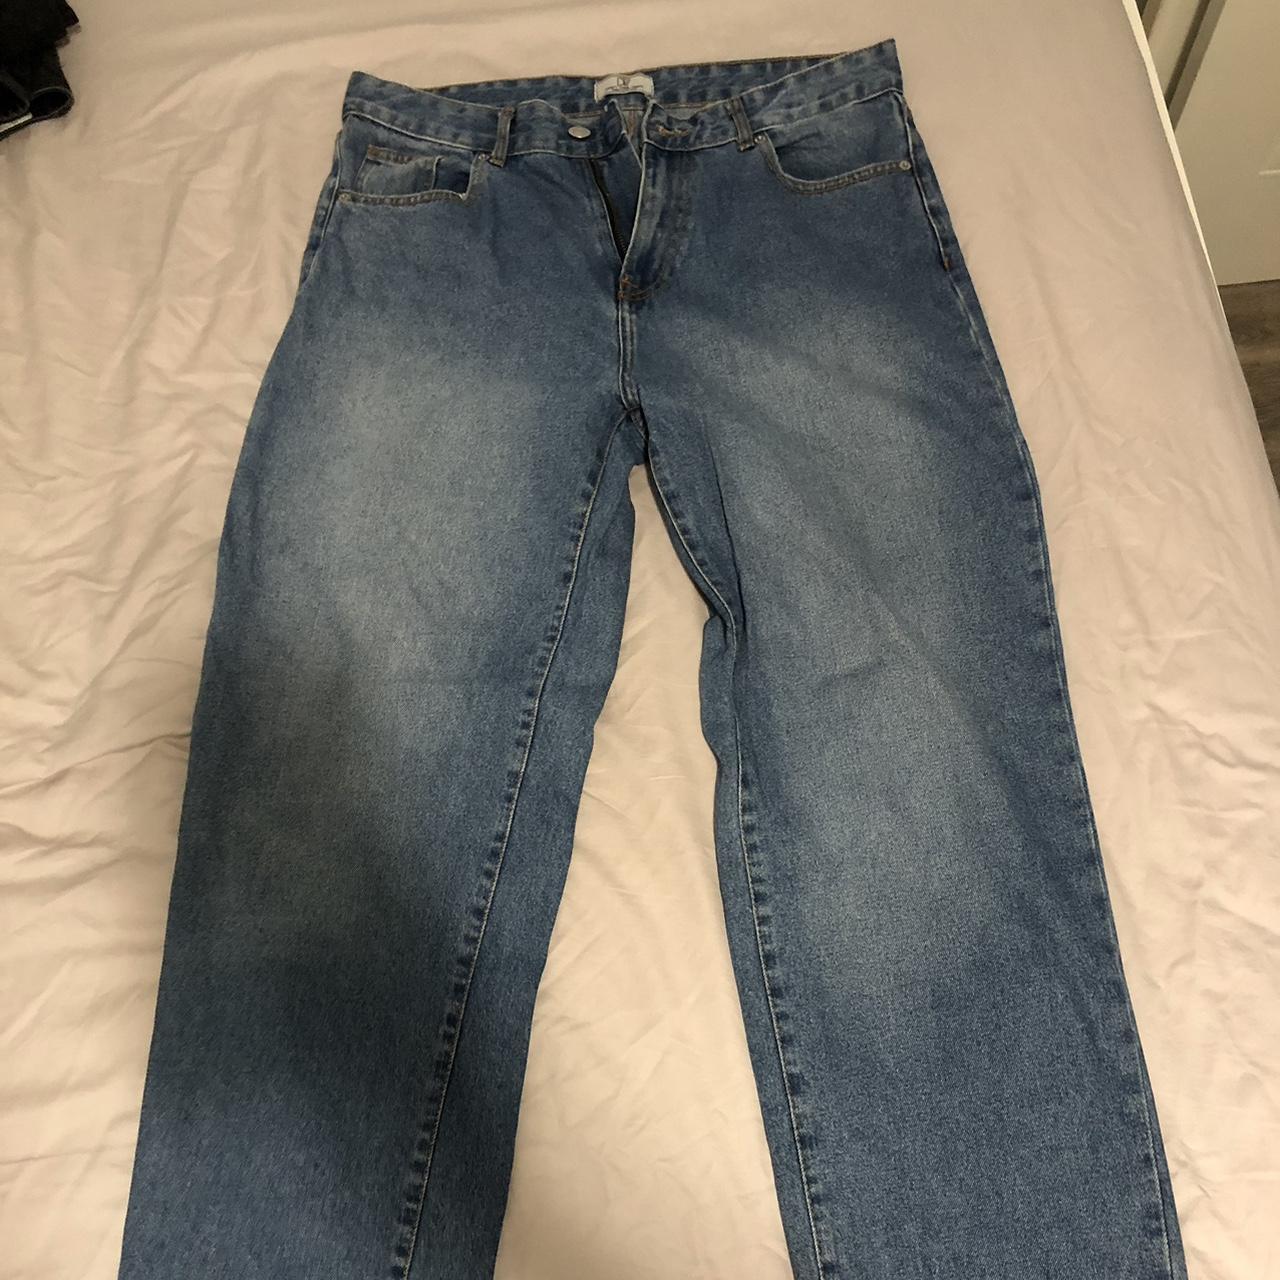 'Dont think twice' baggy wide fit blue jeans. Can... - Depop